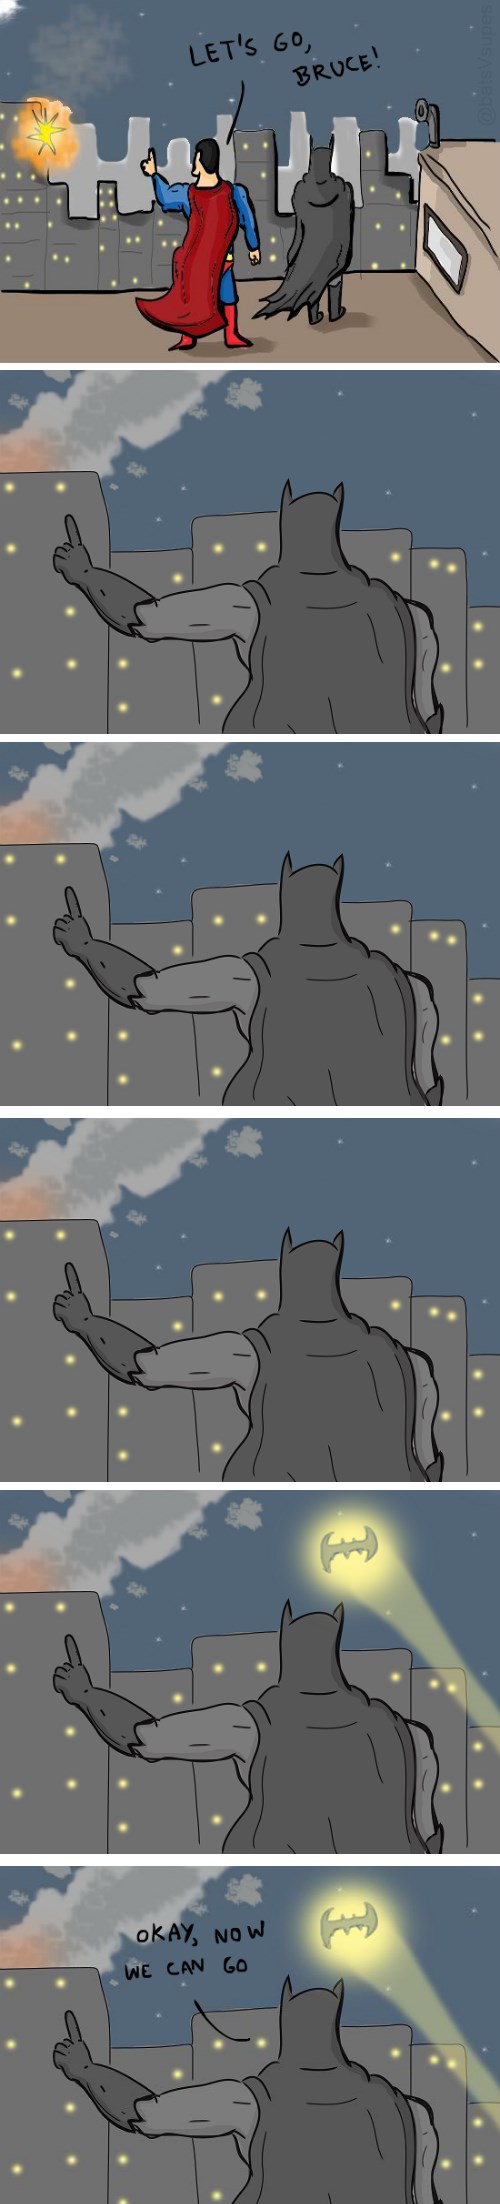 memebase-bat-signal-all-your-memes-in-our-base-funny-memes-cheezburger